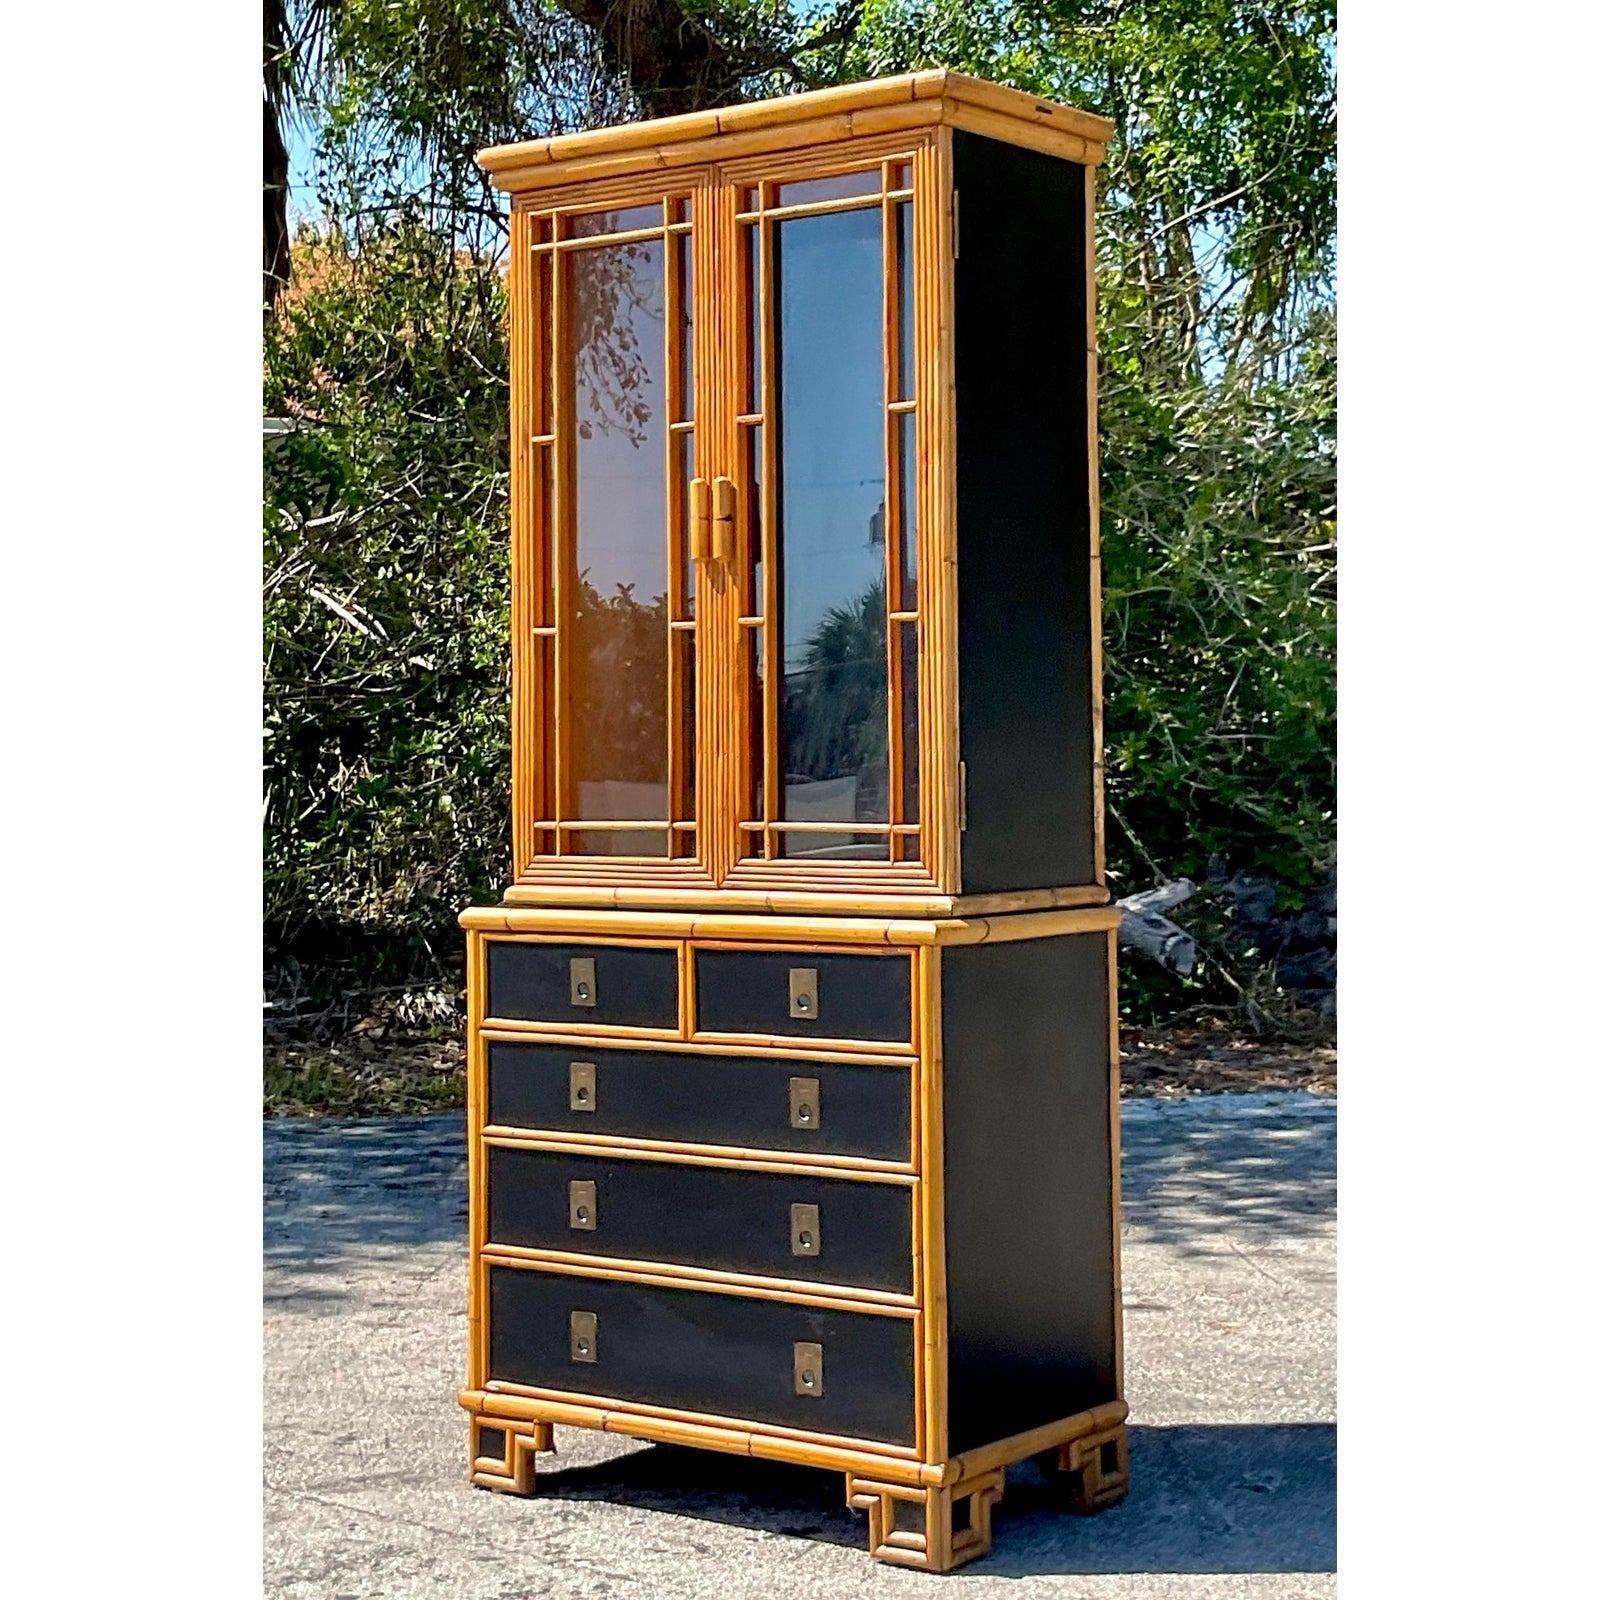 A stunning vintage Boho display cabinet. Chic rattan trimmed frame with lacquered insert panels and brass campaign hardware. Acquired from a Palm Beach estate.